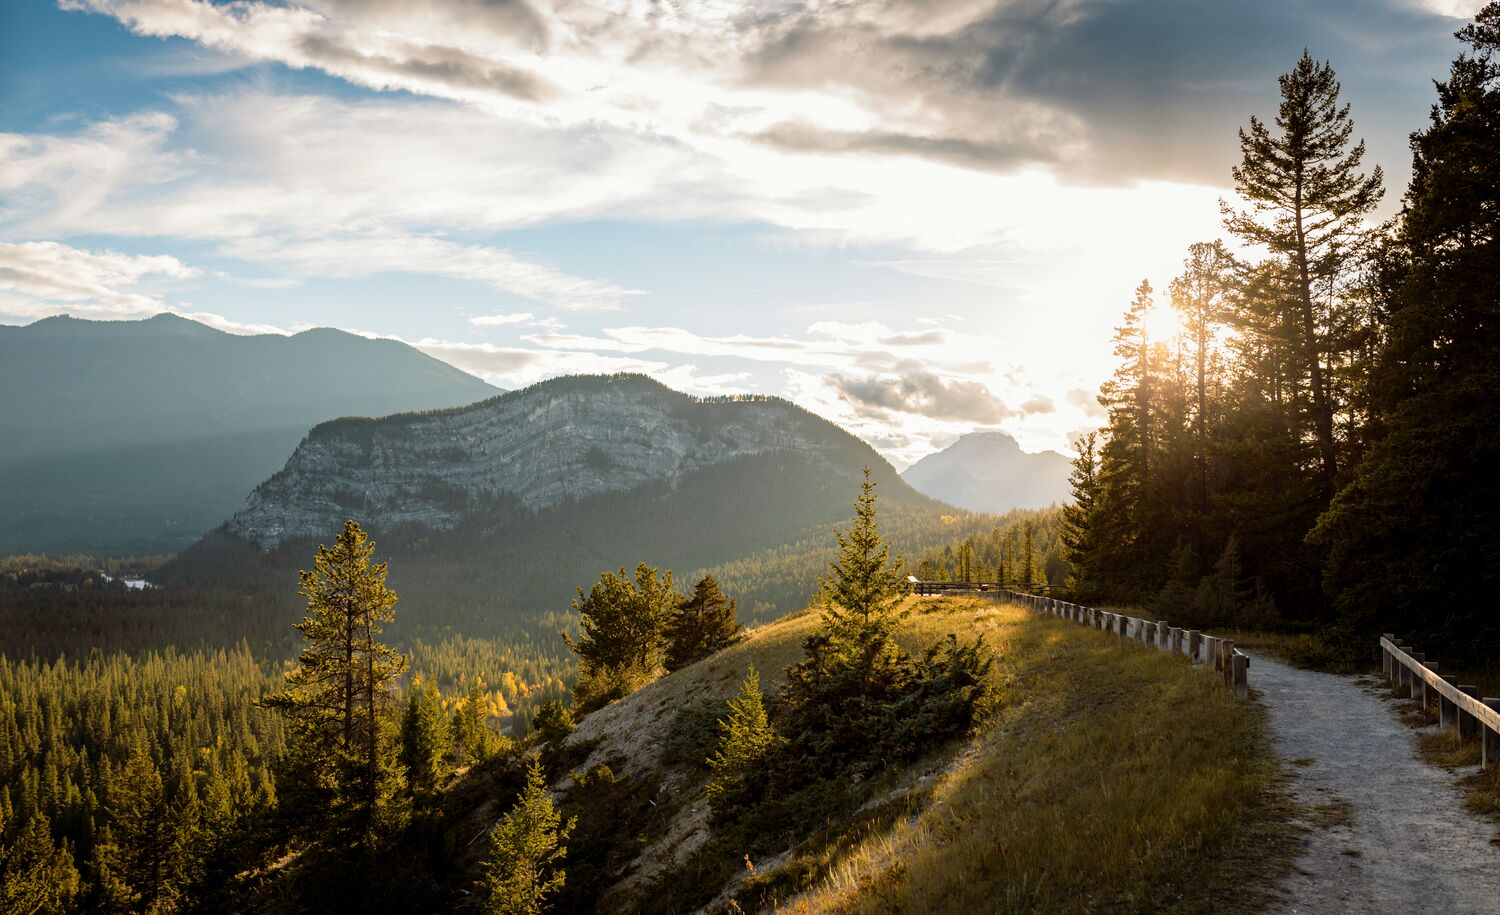 Tunnel Mountain at sunset in the summer from the Hoodoos Trail in Banff National Park.